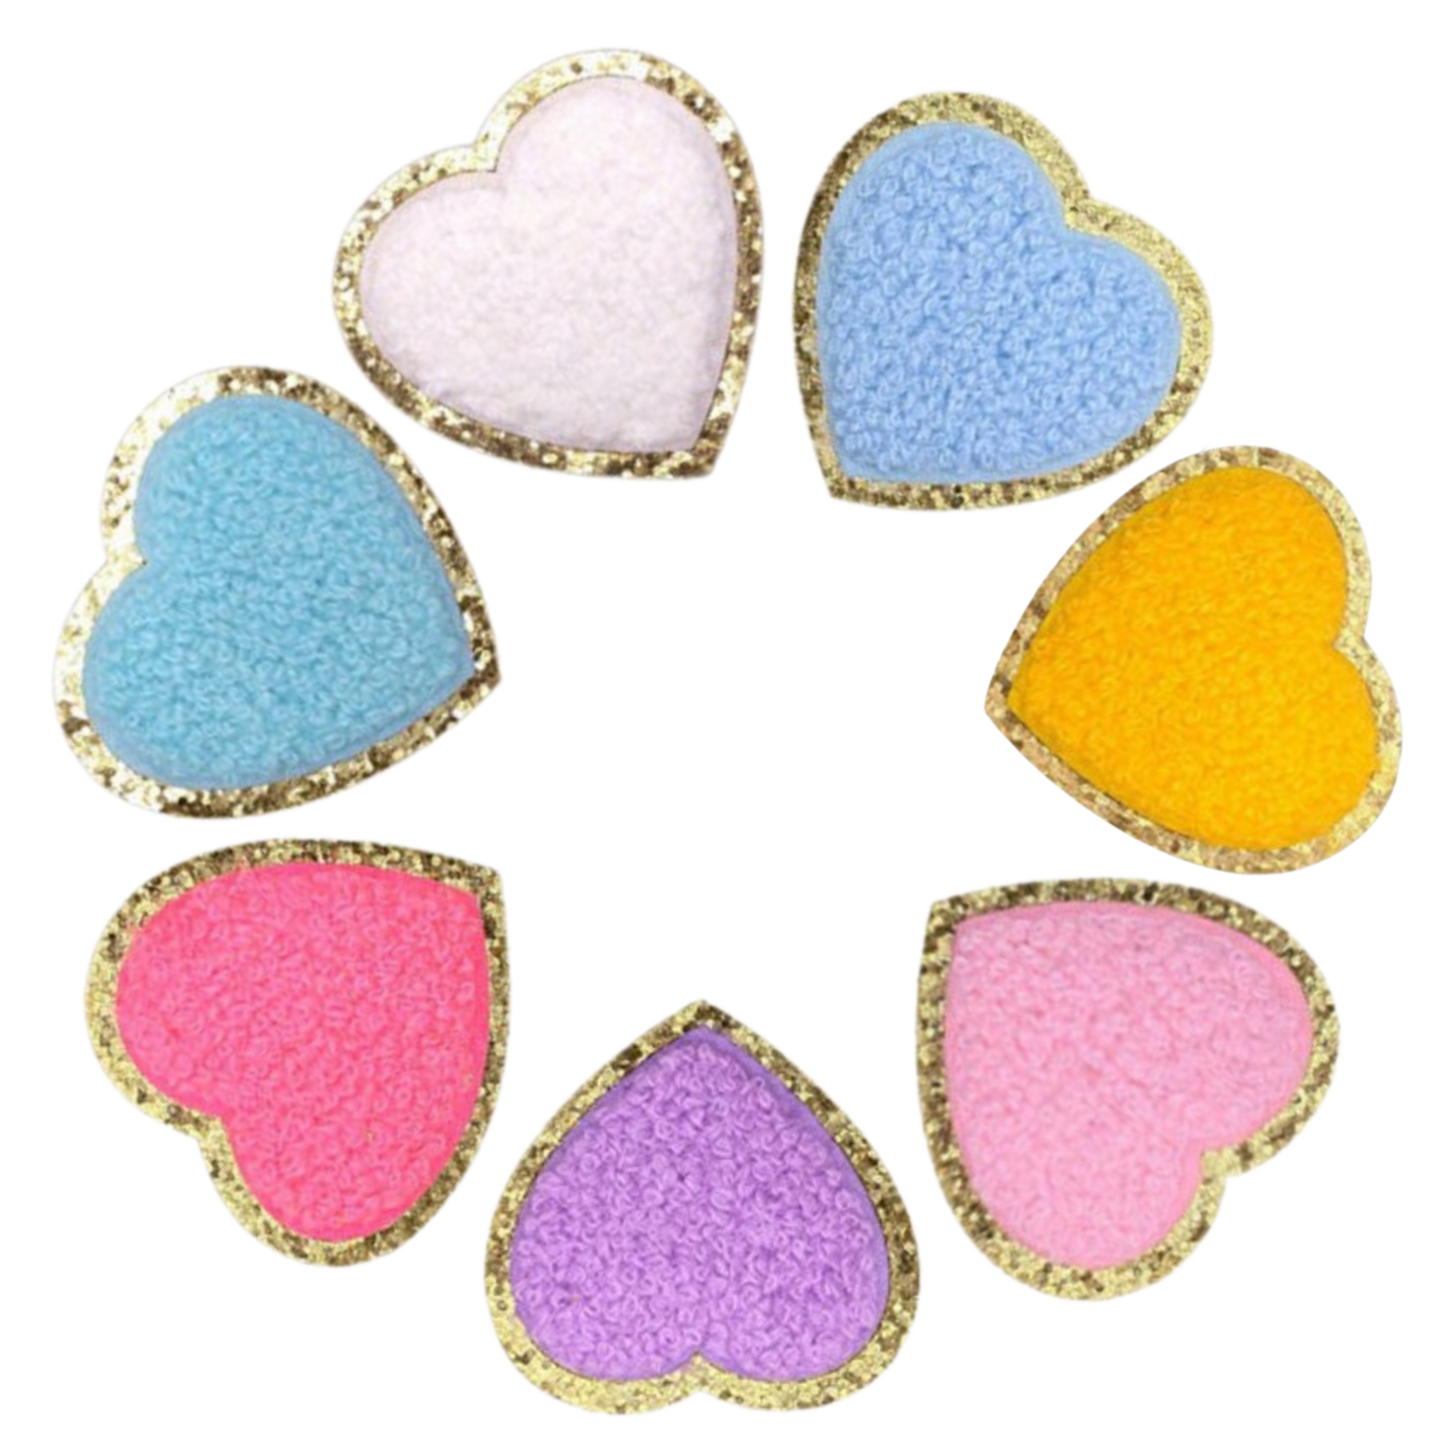 Heart on Gold Patches (Small/Chenille)